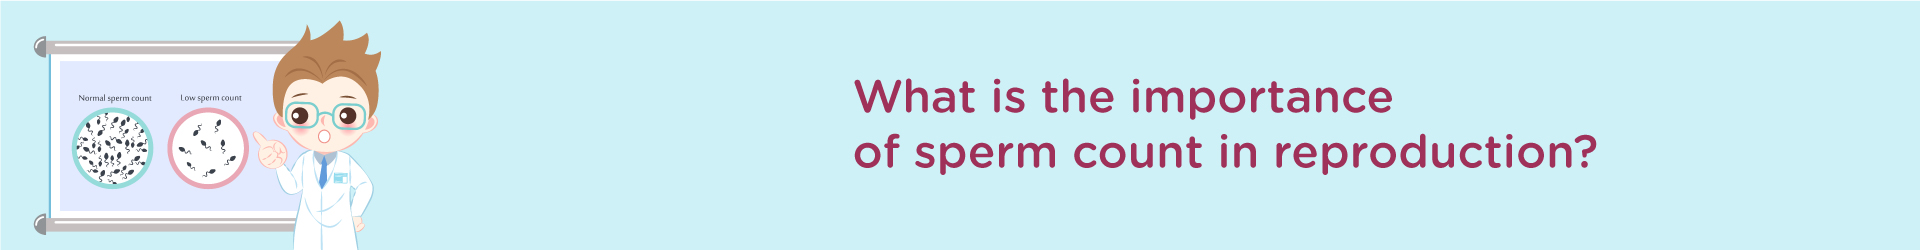 What is the Importance of Sperm Count in Reproduction?